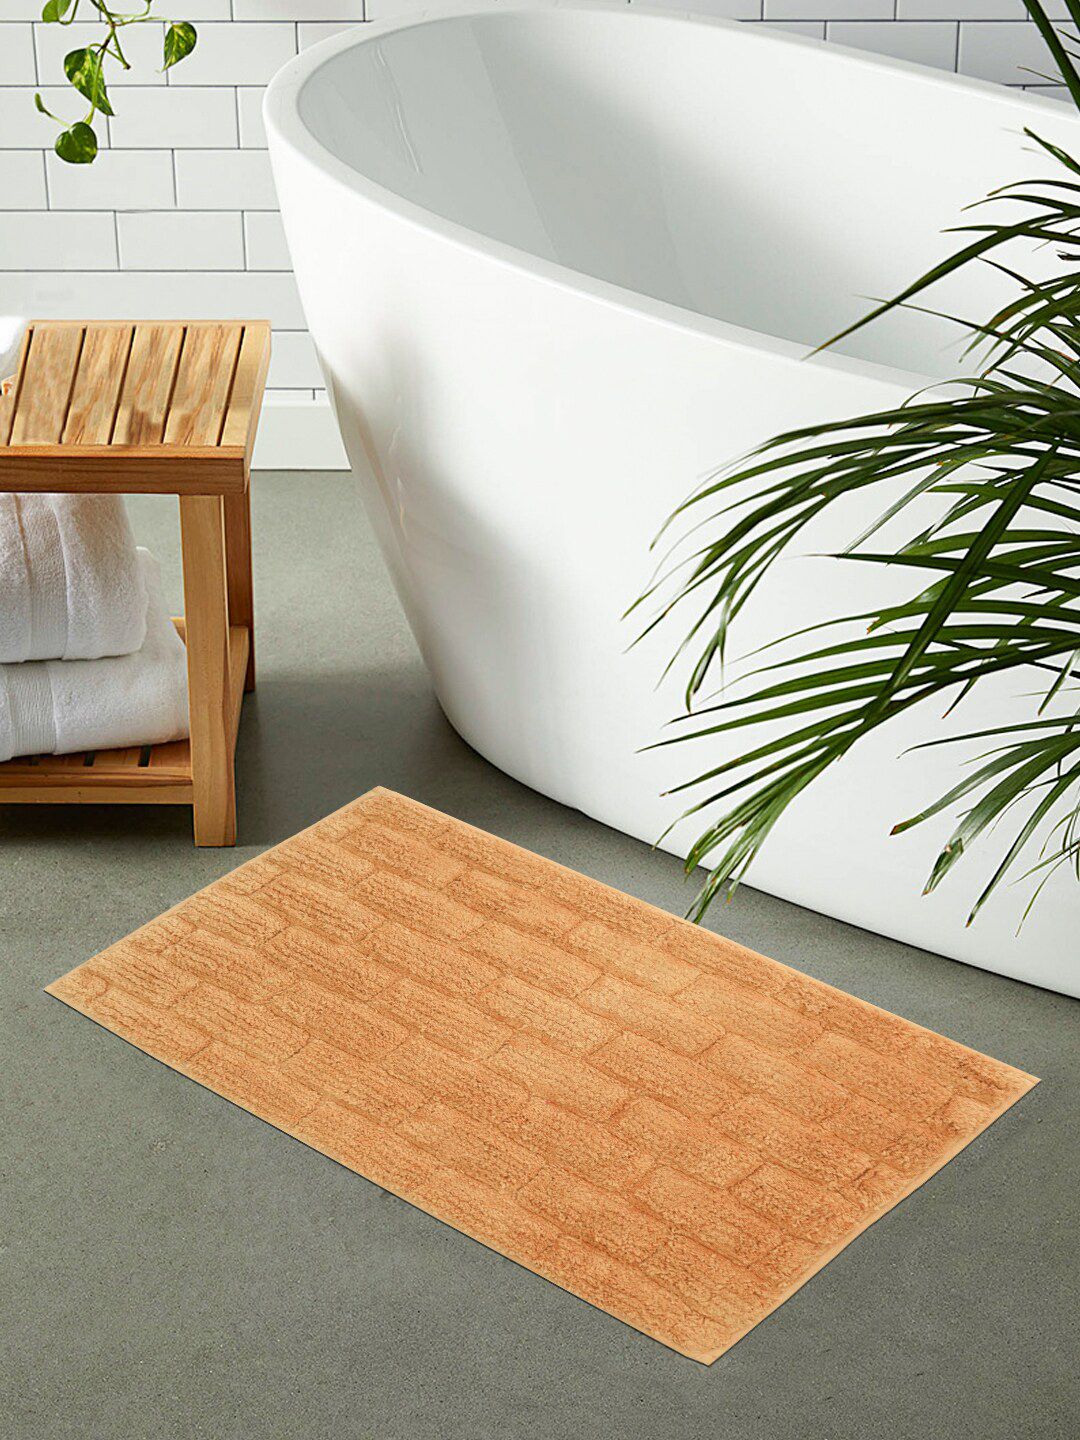 Shresmo Tan Brown Solid 2200 GSM Cotton Bath Rugs Price in India